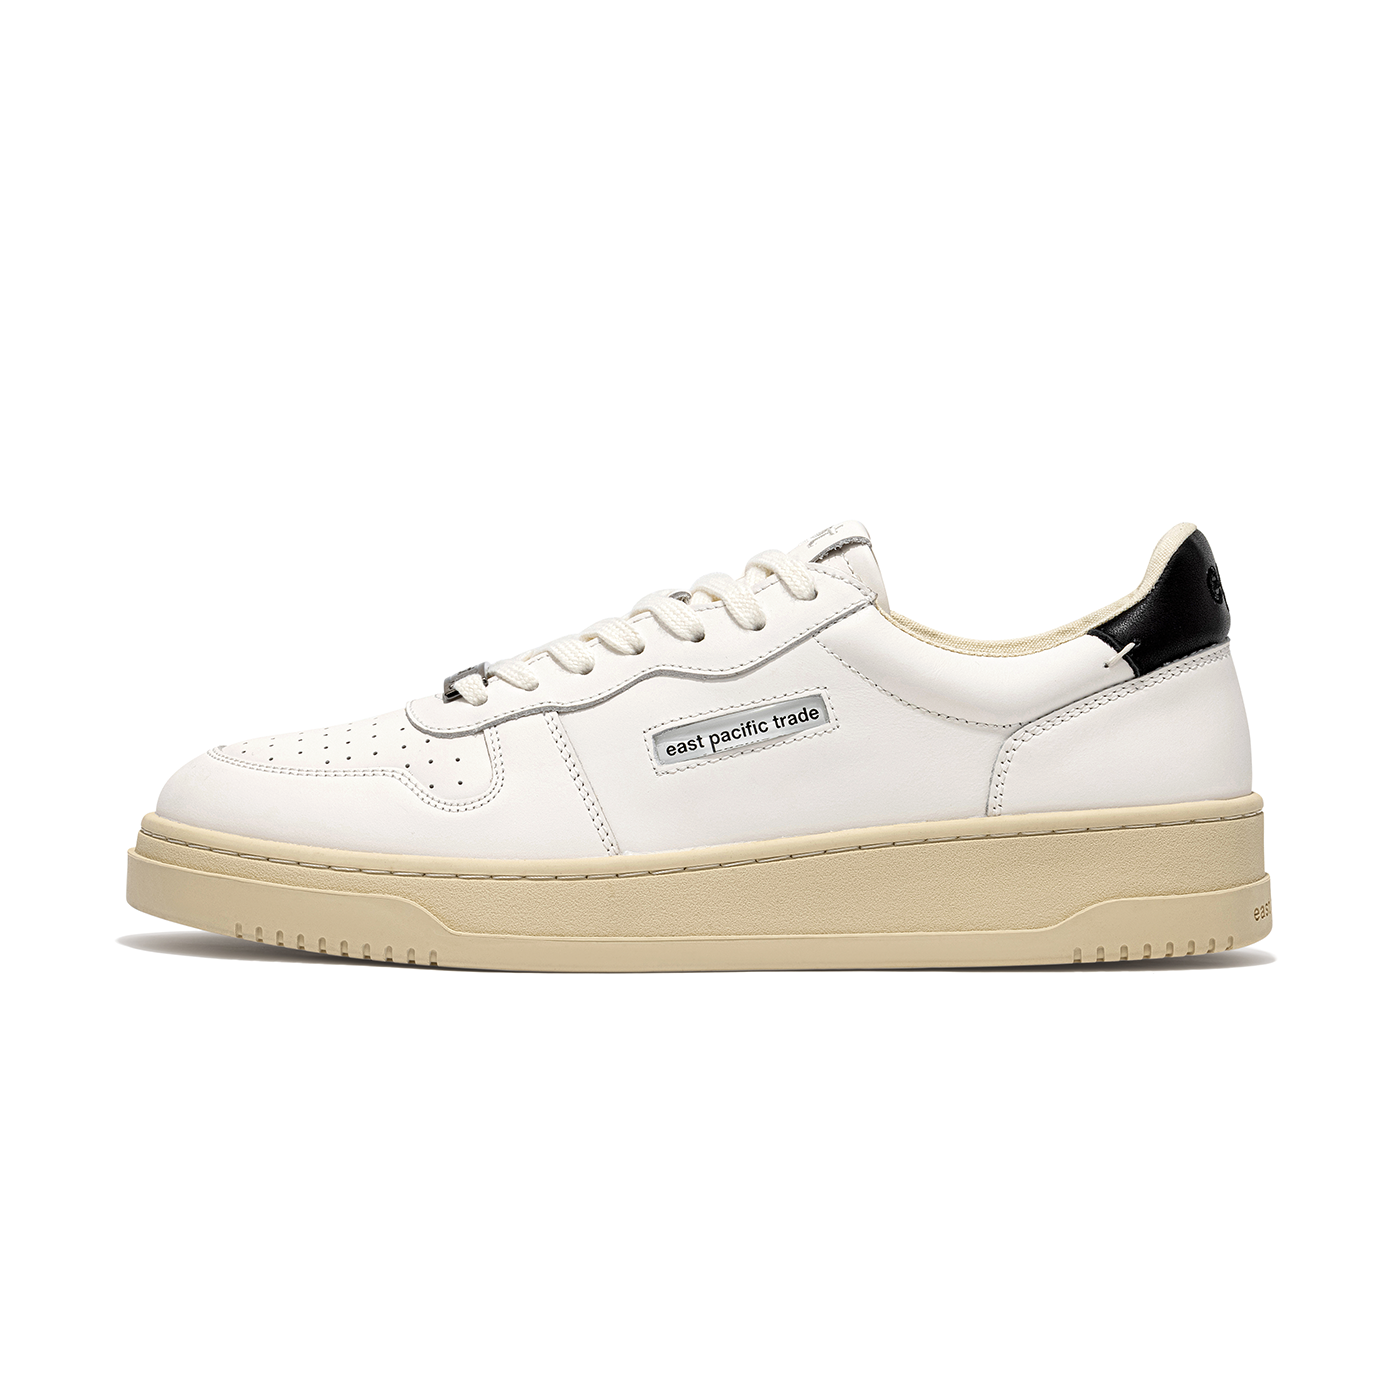 basket court East Pacific Trade off white white / black